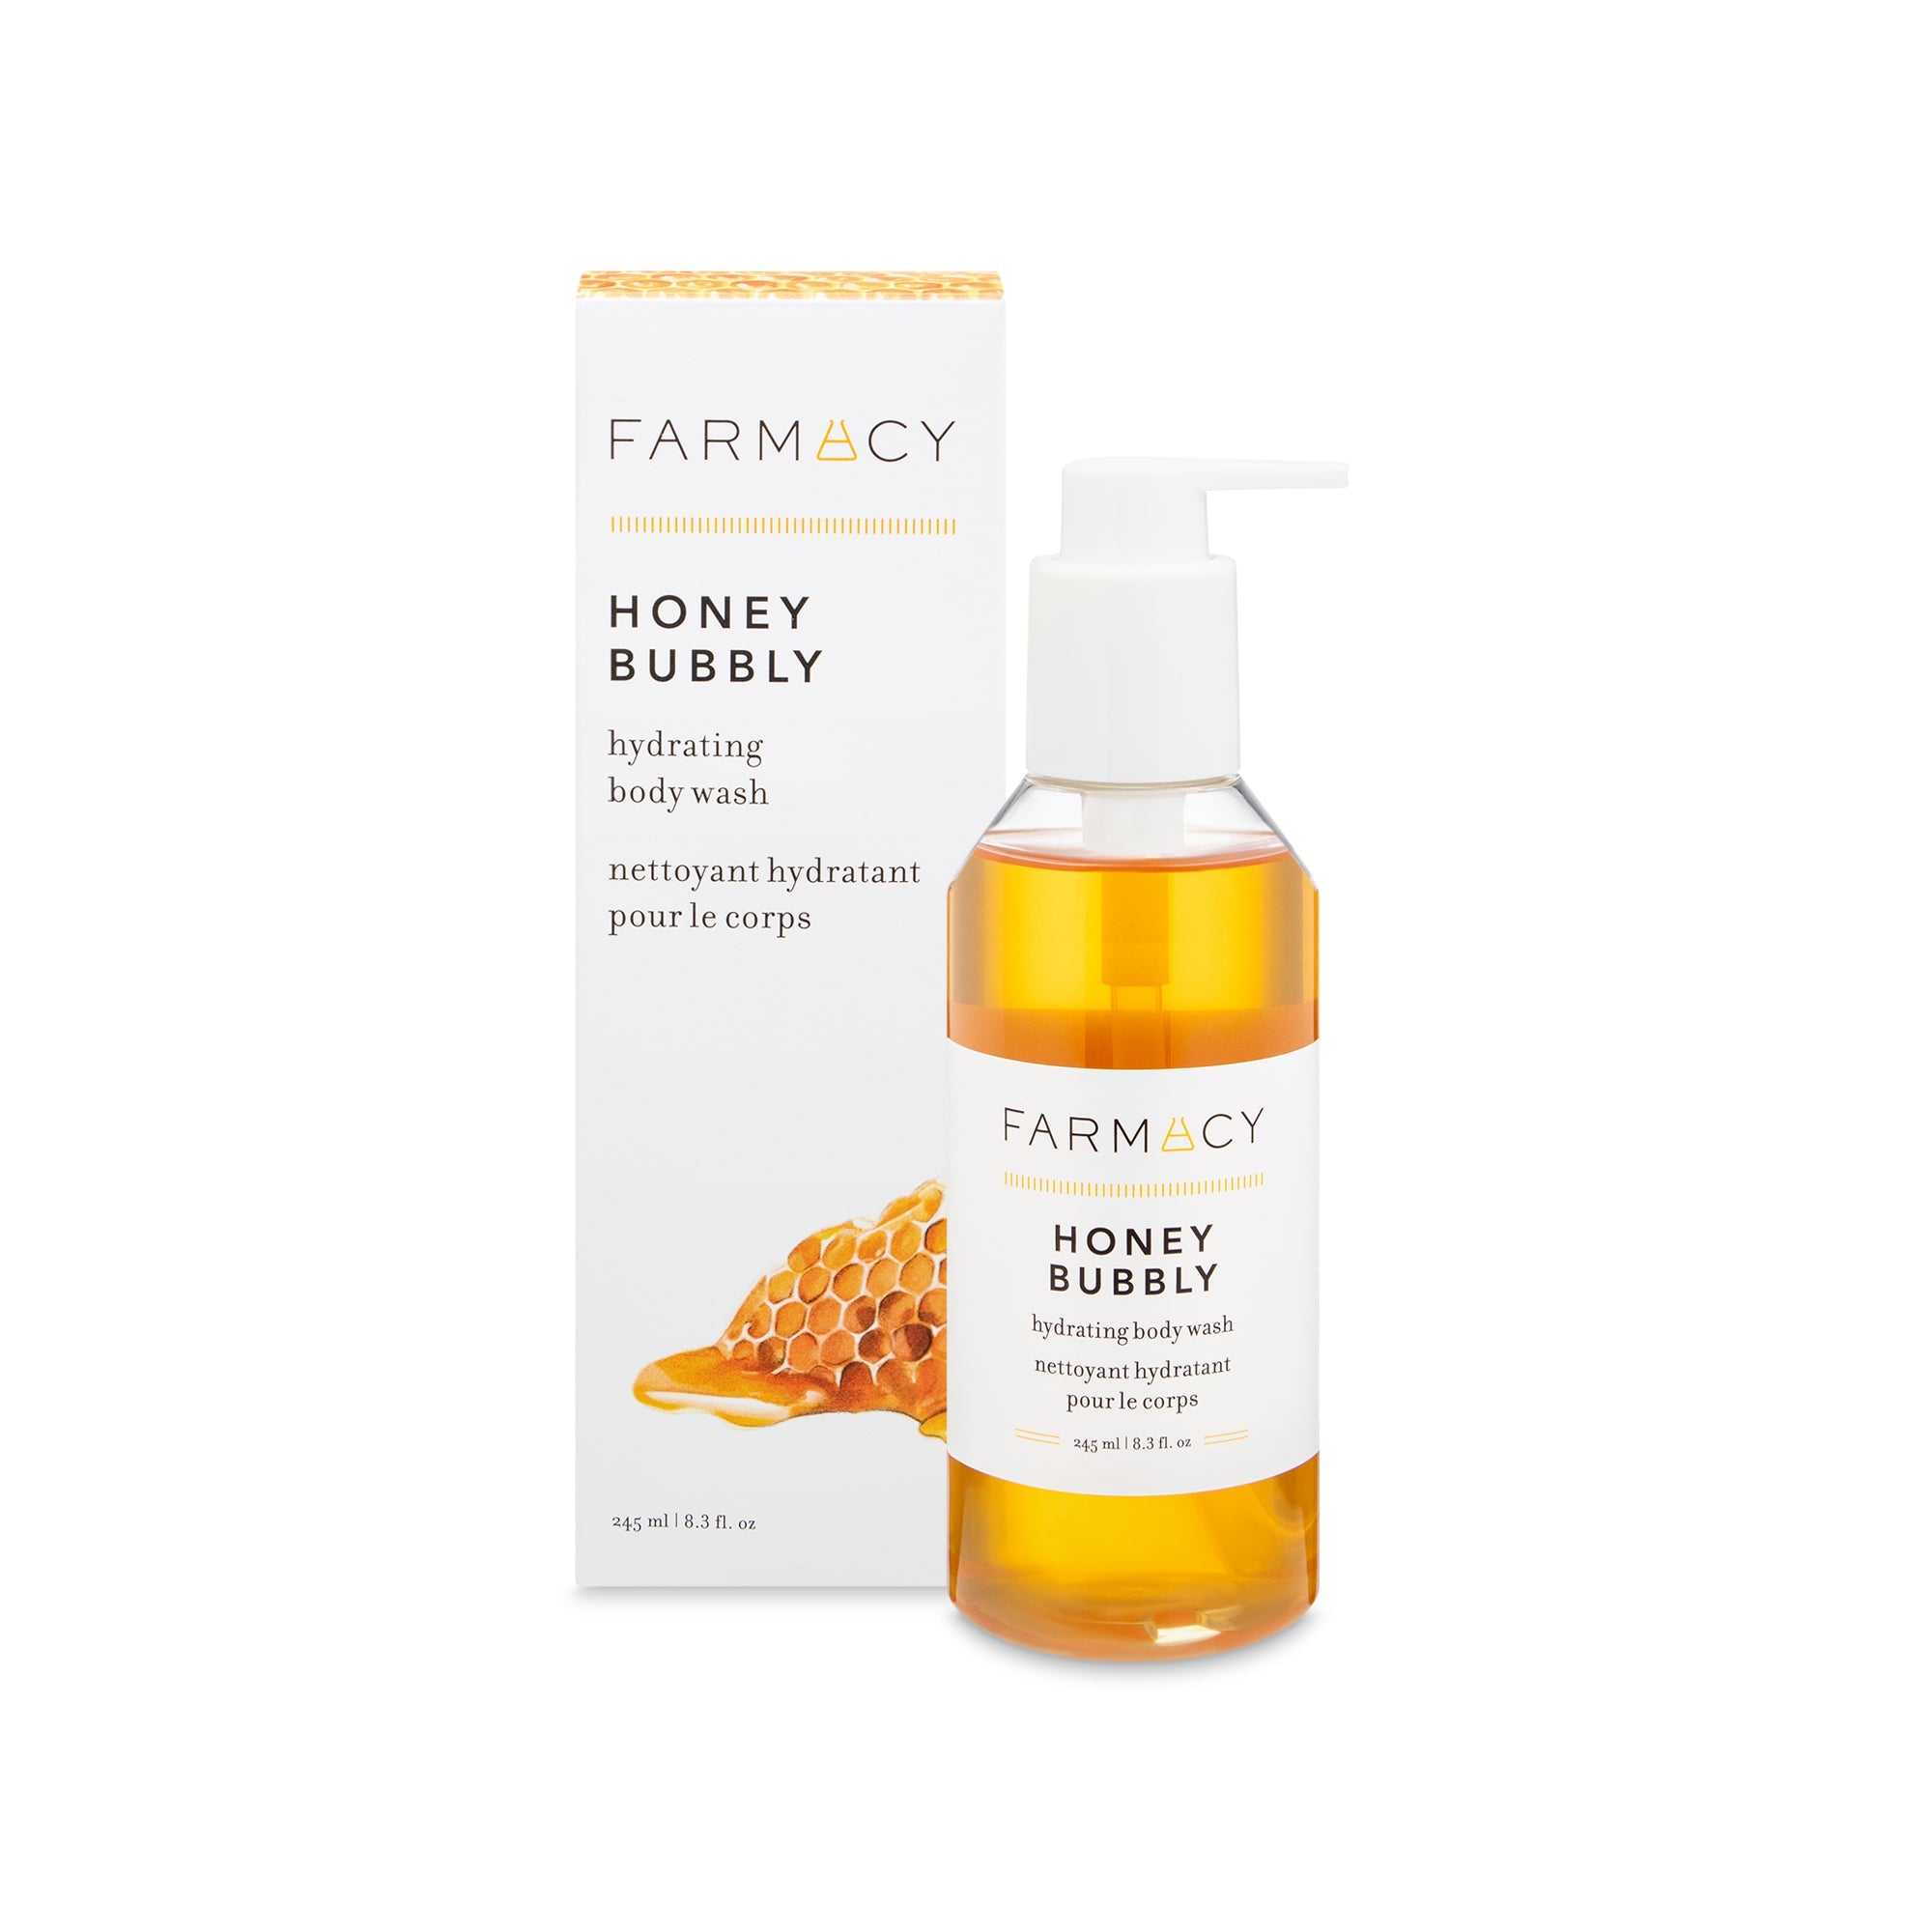 A box and bottle of Farmacy's Honey Bubbly body wash side by side